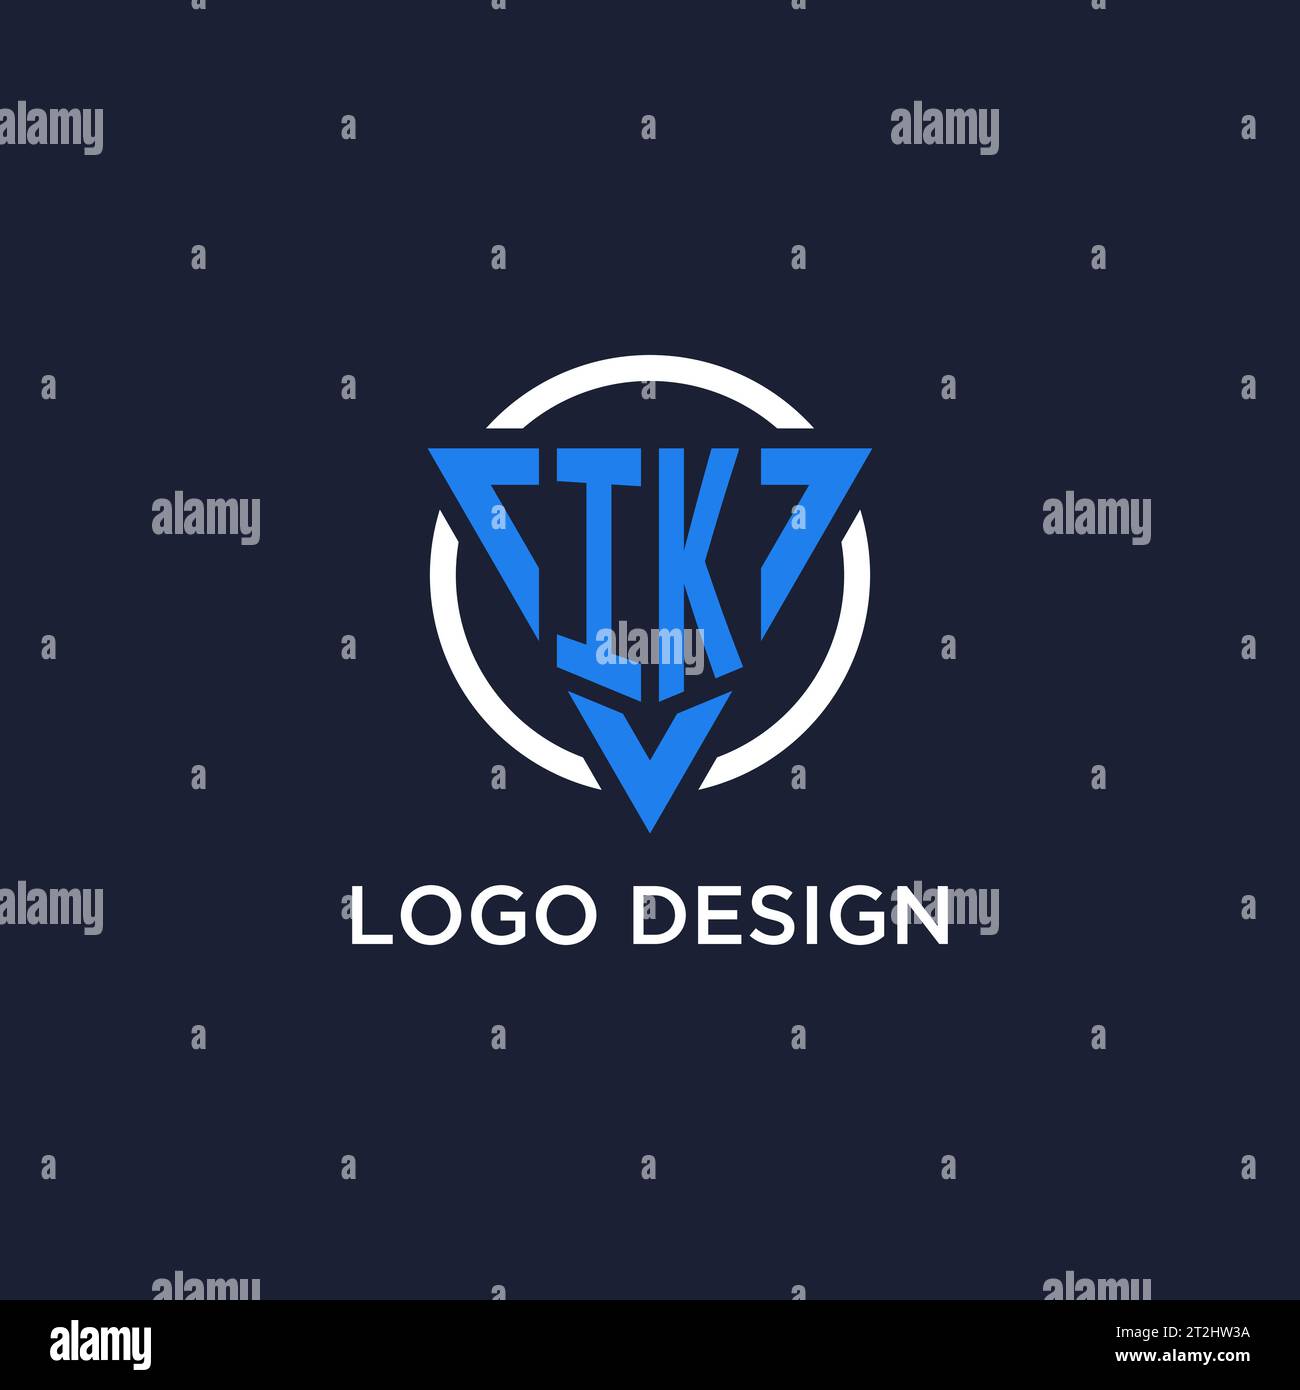 IK monogram logo with triangle shape and circle design vector Stock Vector